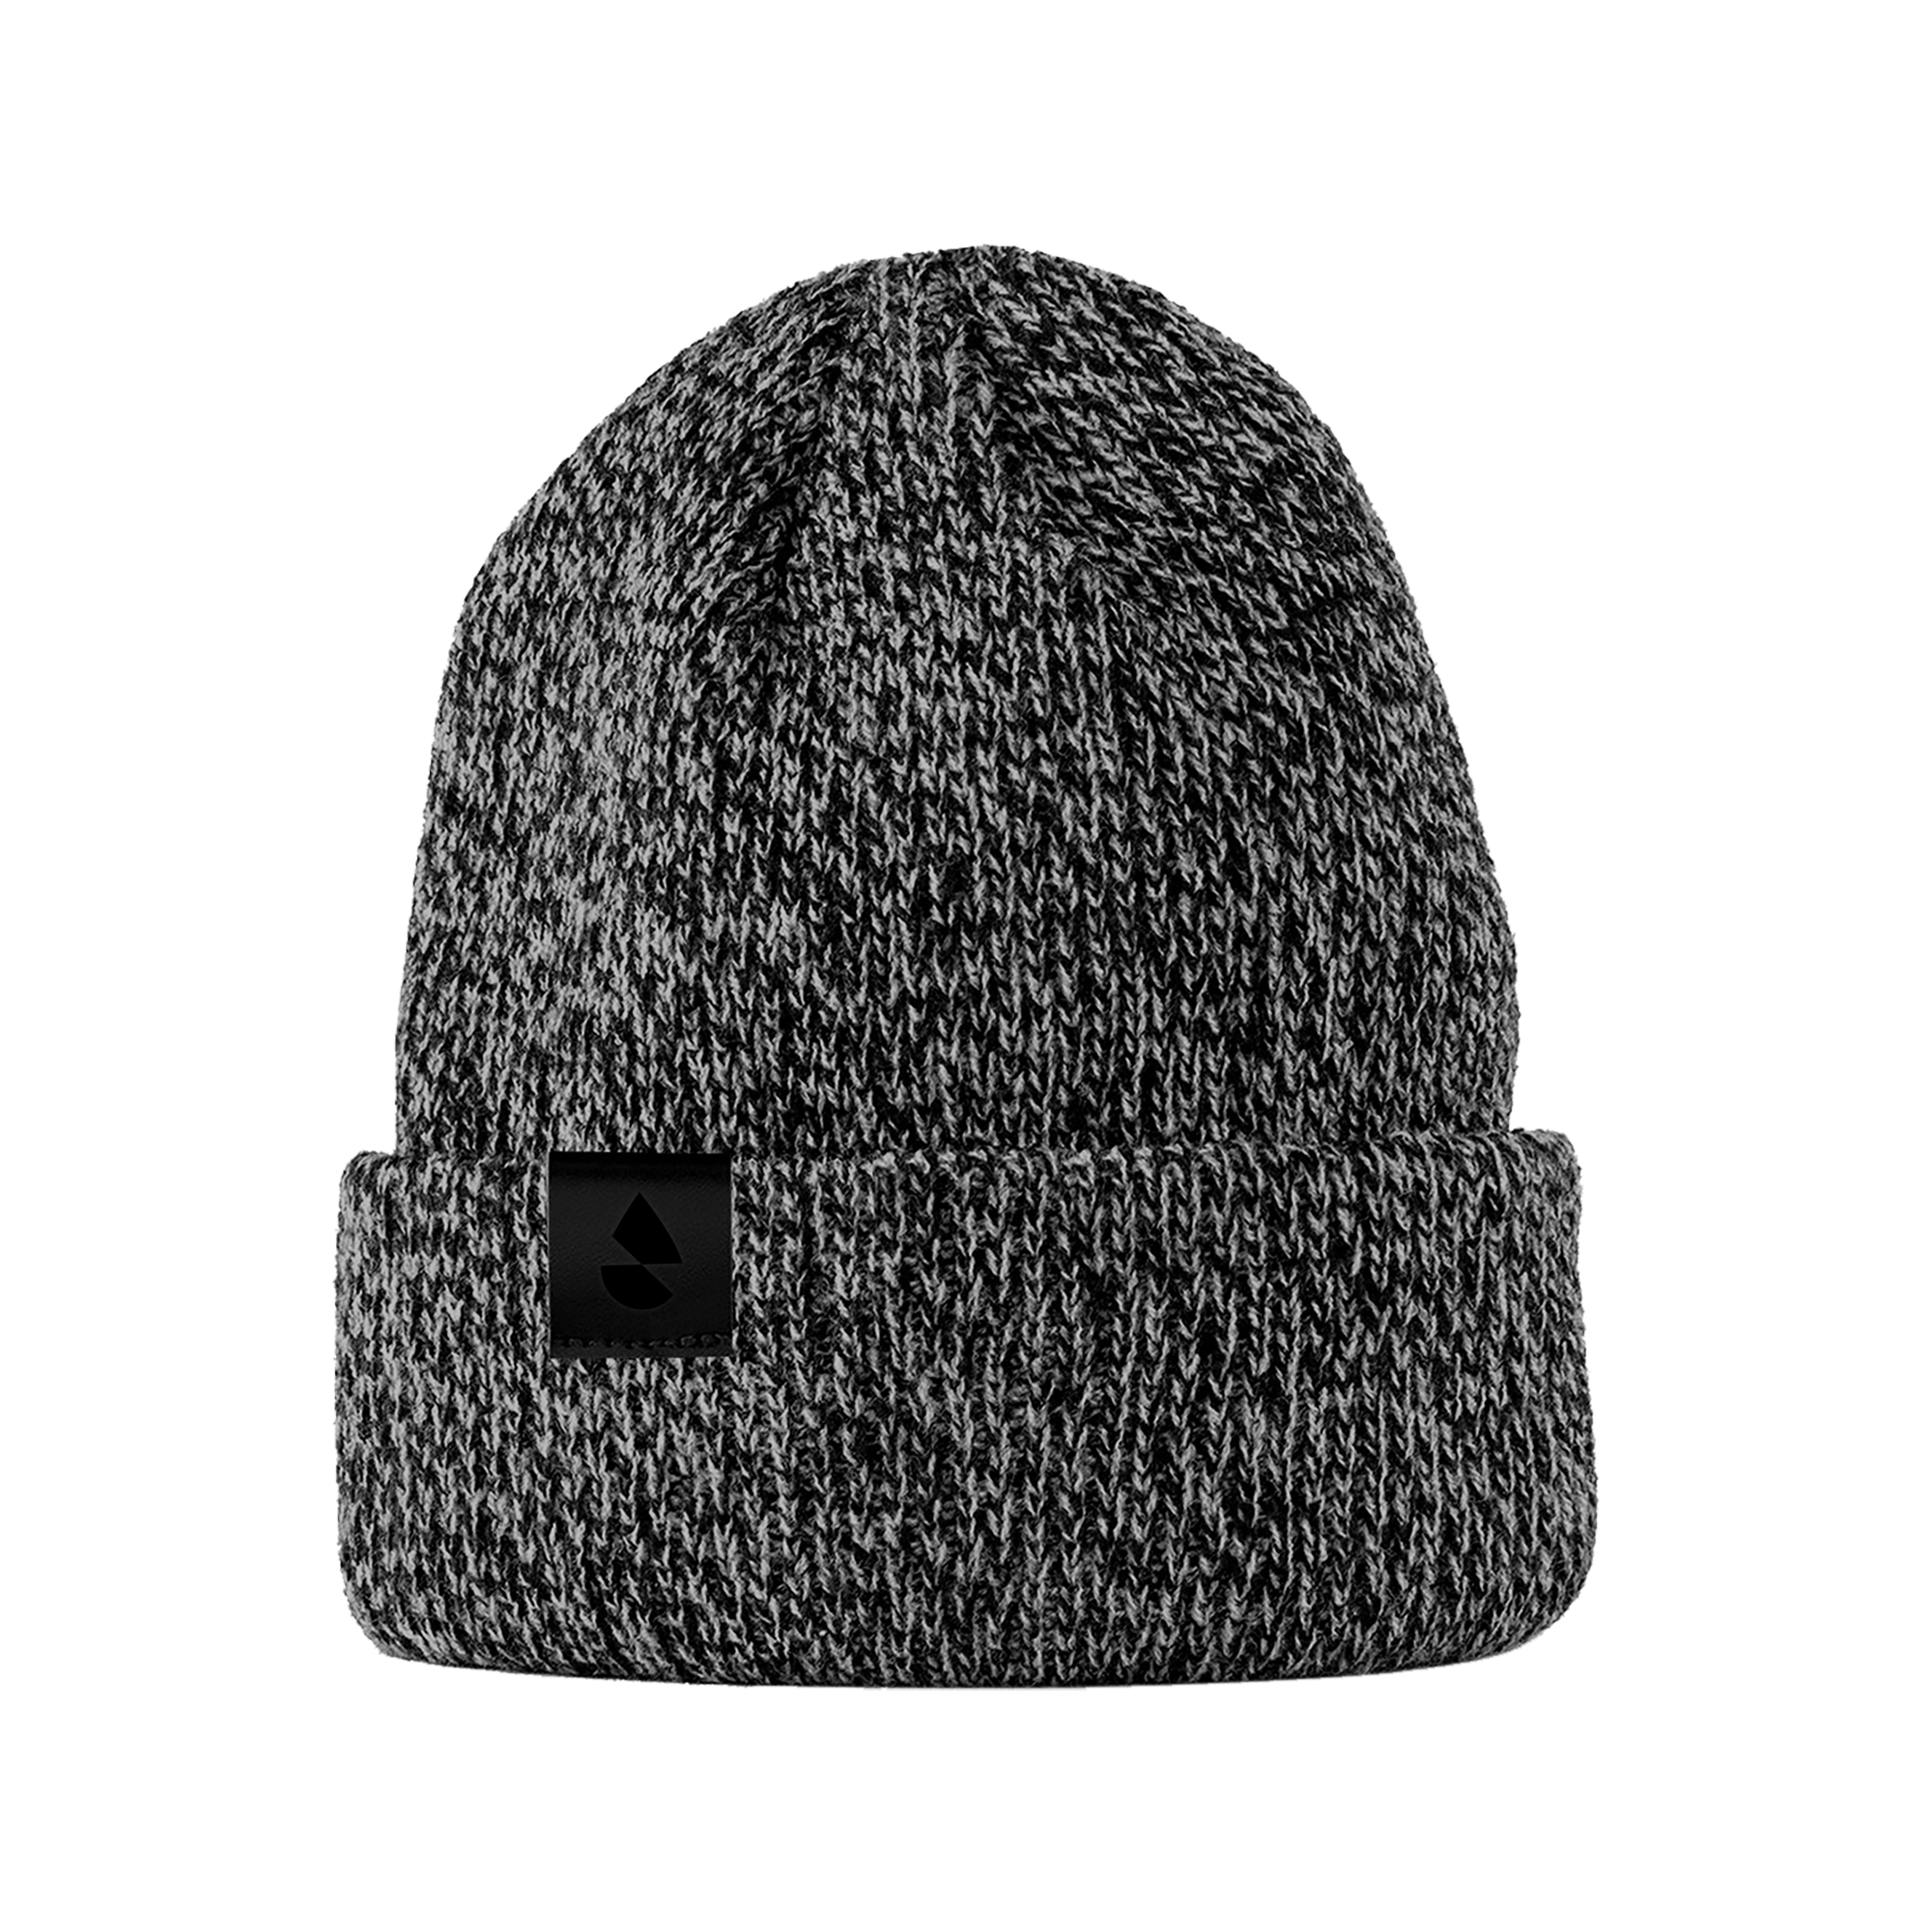 Gray Baxter beanie, an apparel promotional product